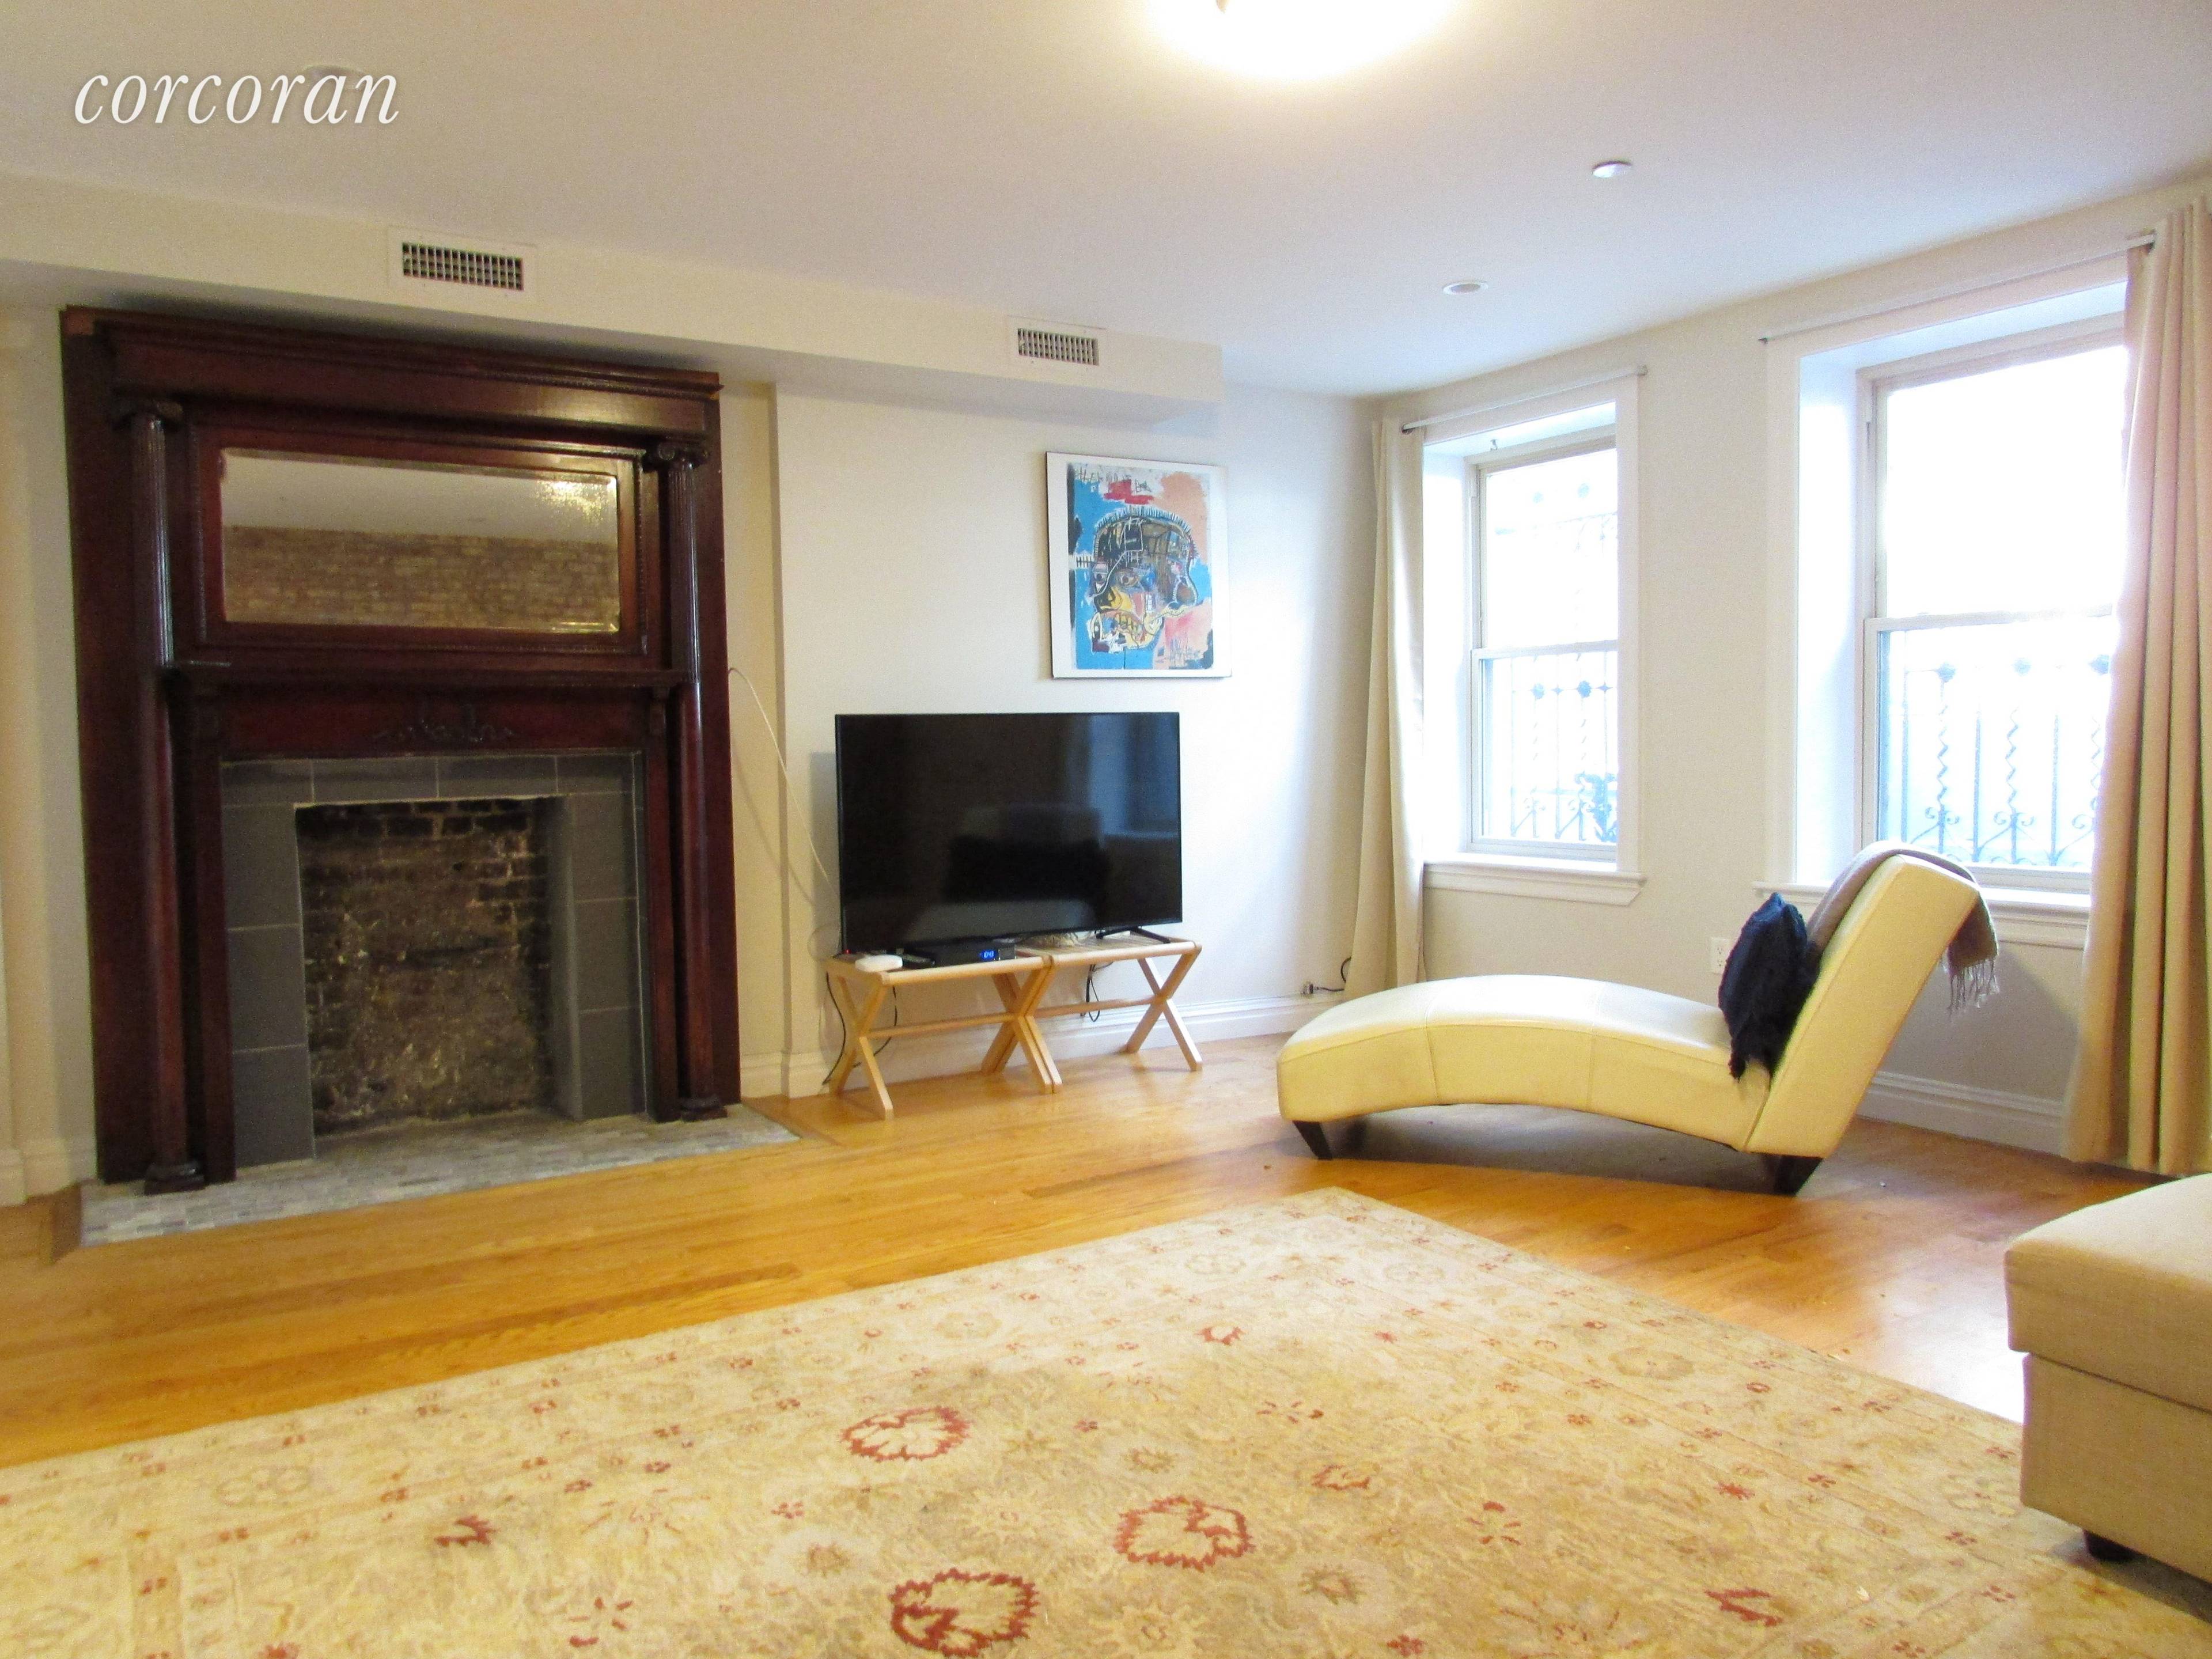 Spacious two bedroom with decorative fireplace, hardwood floors and over sized windows.